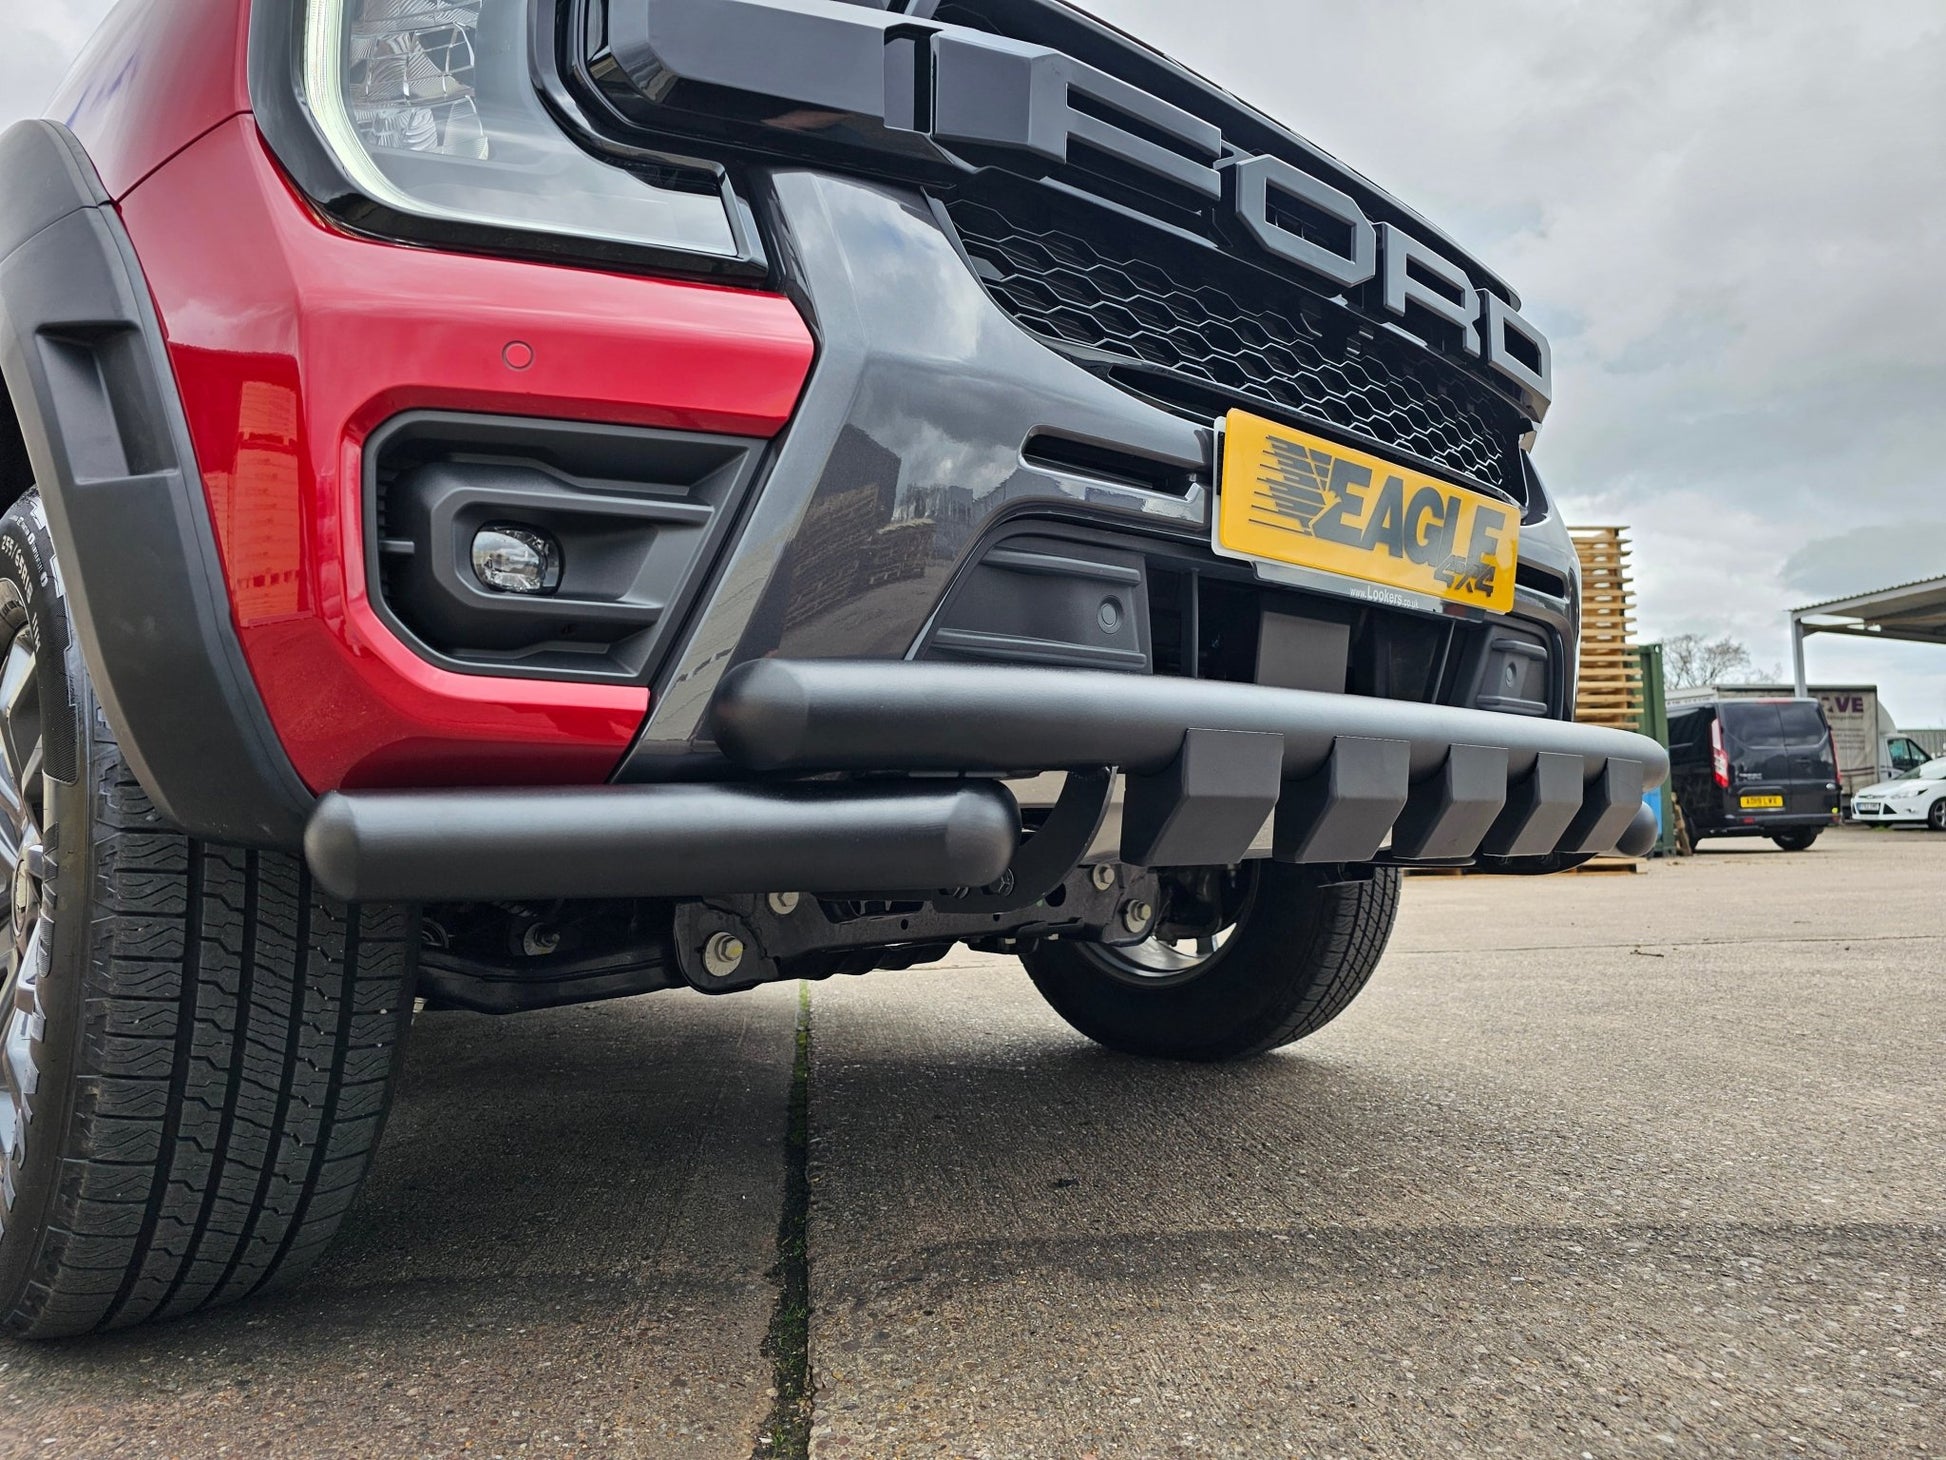 Next Generation 2023 Ford Ranger Accessories by Eagle 4x4 – Next